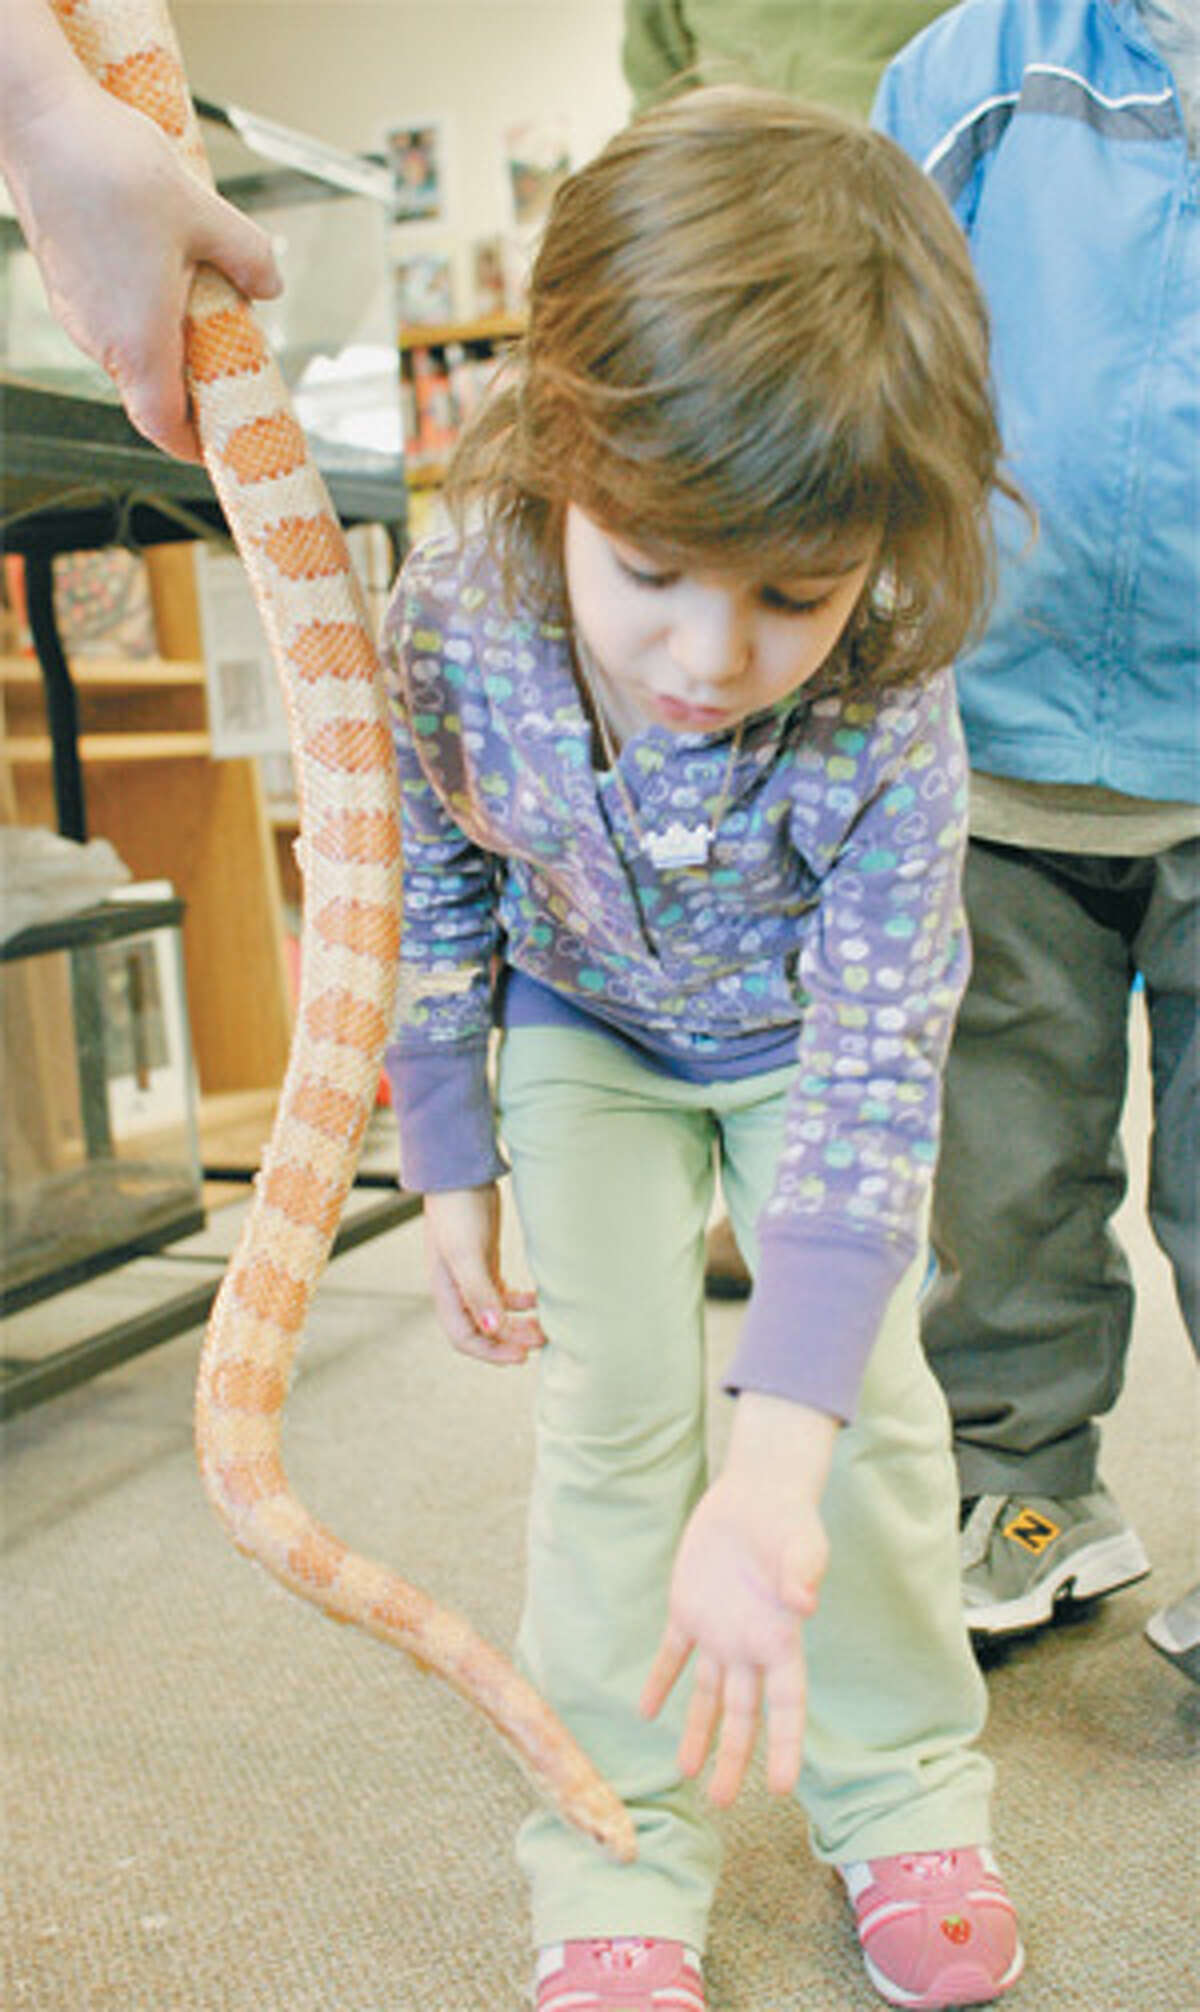 Peaches the pet snake was popular with Huntington Branch Library patrons, especially youngsters. (Shelton Herald 2008 file photo)